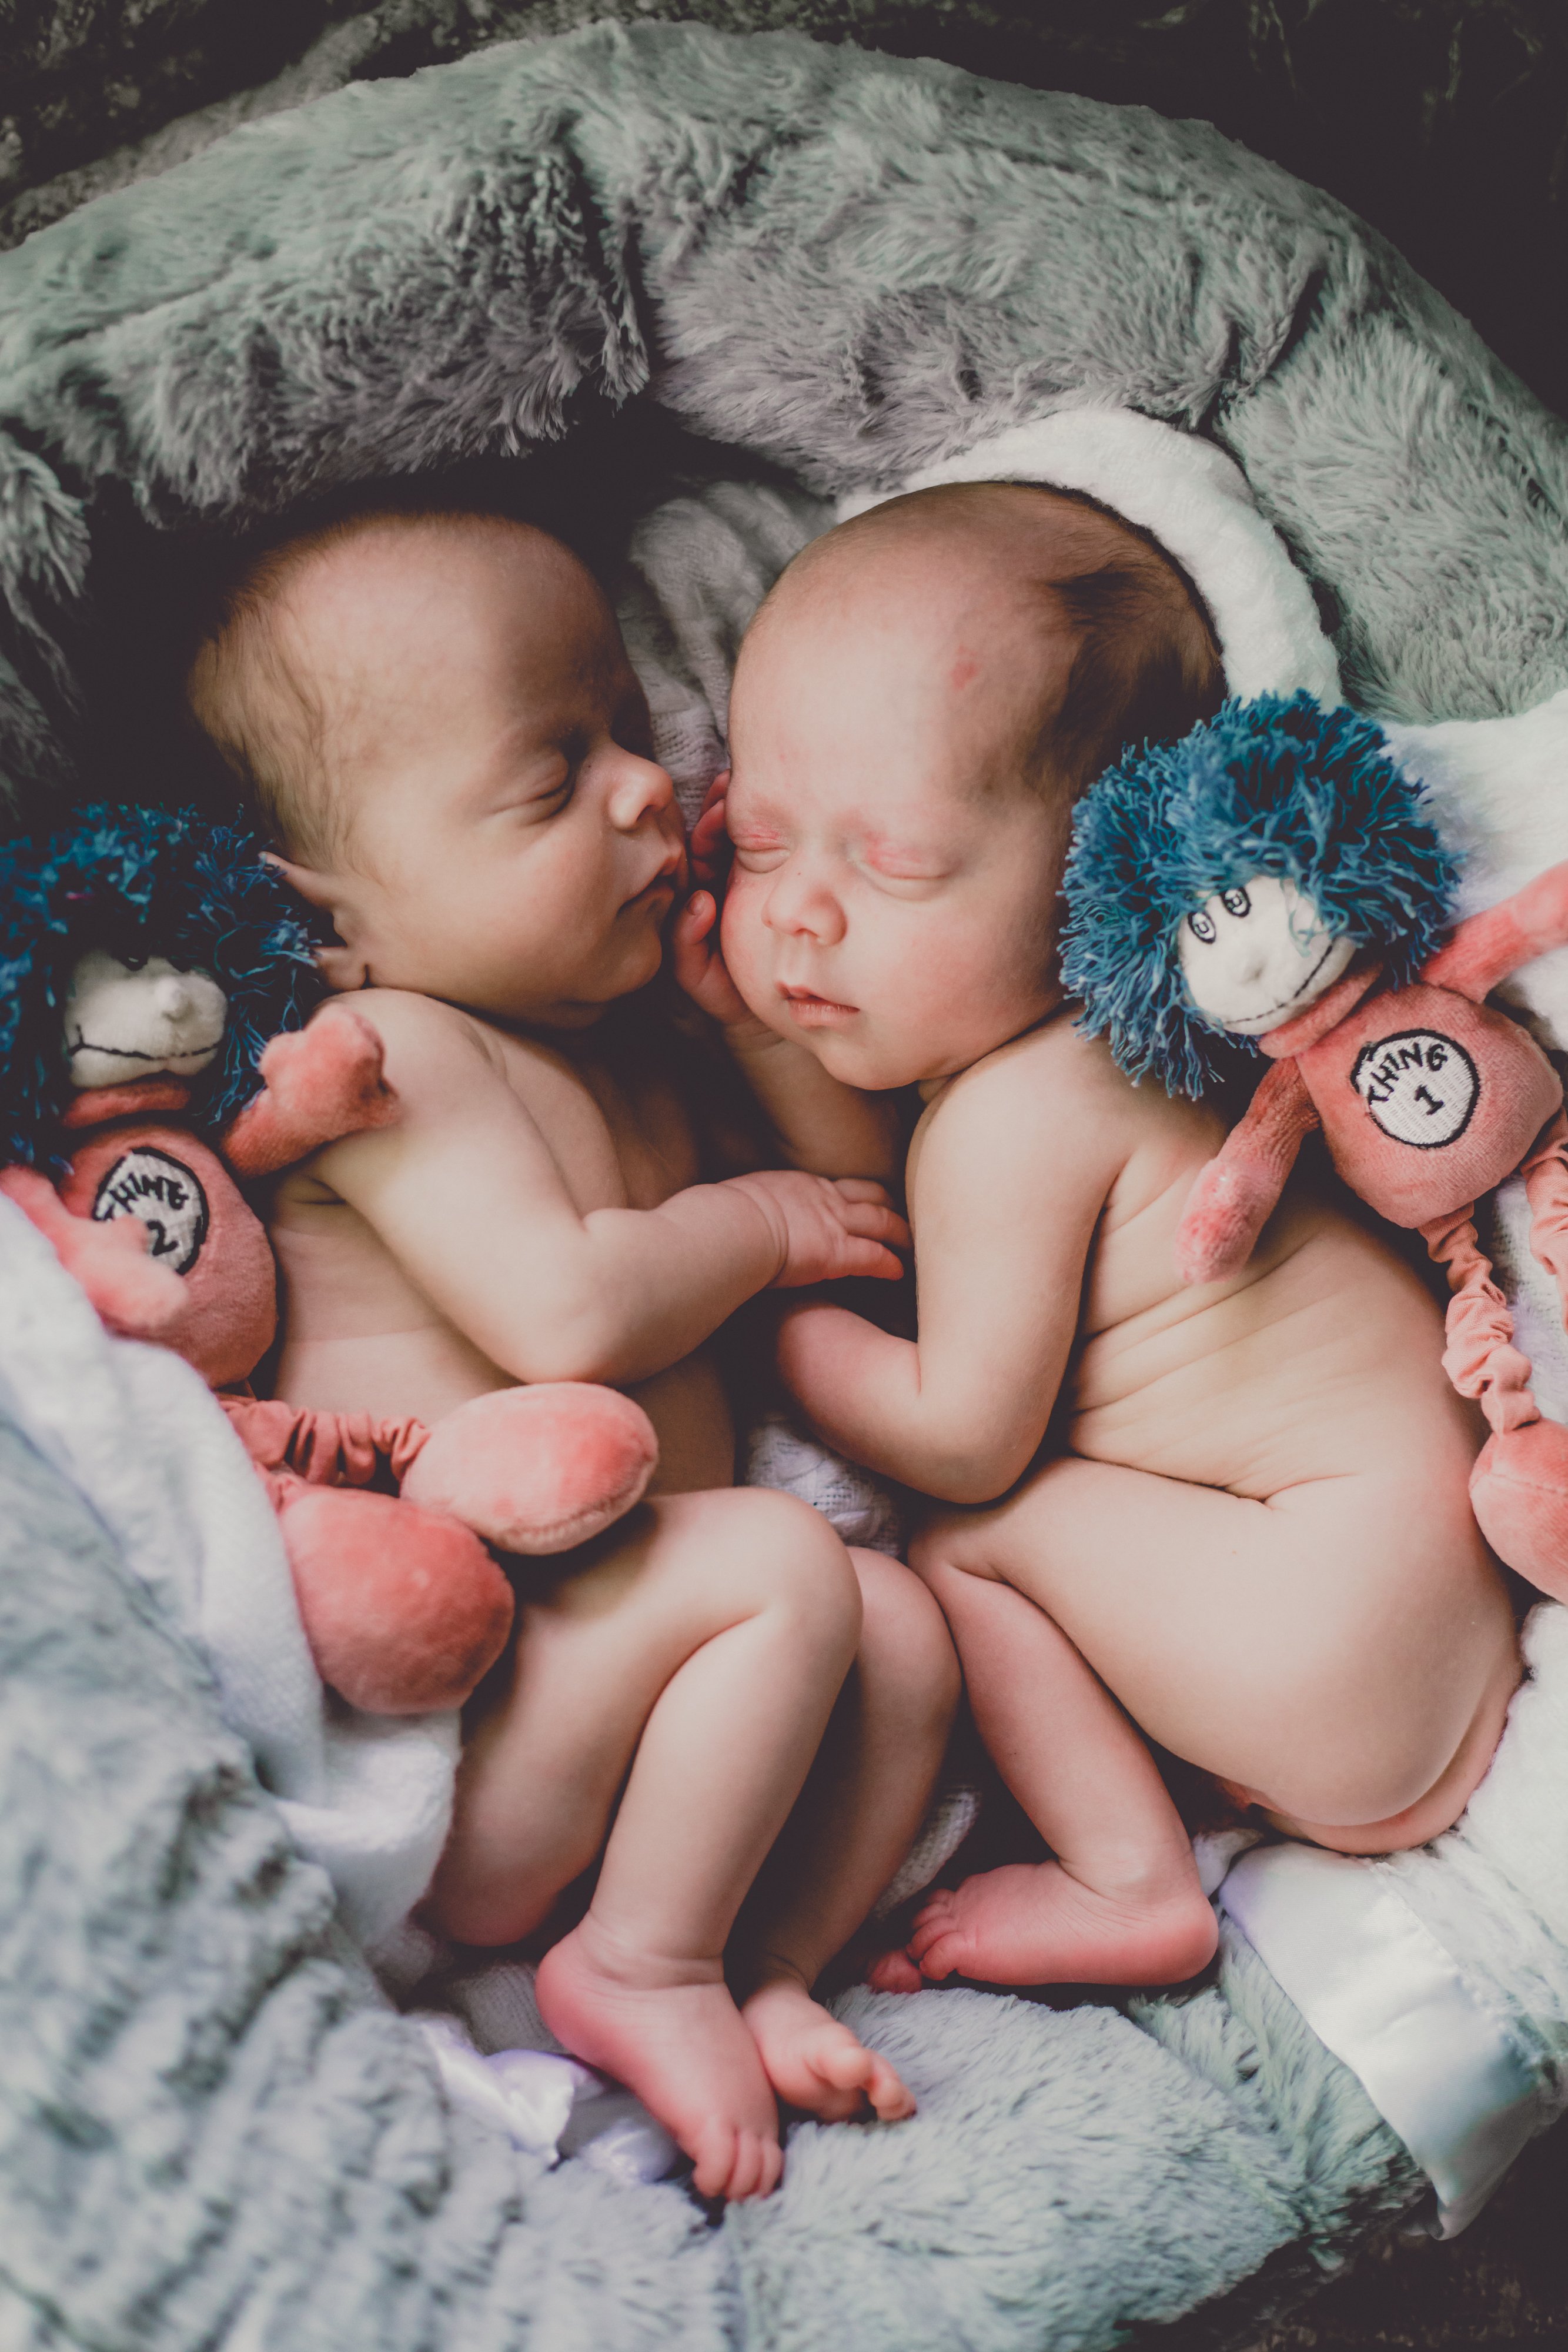 Newborn twins Aiden and Nolan photographed by Olive Studio while asleep in their baby cot. 